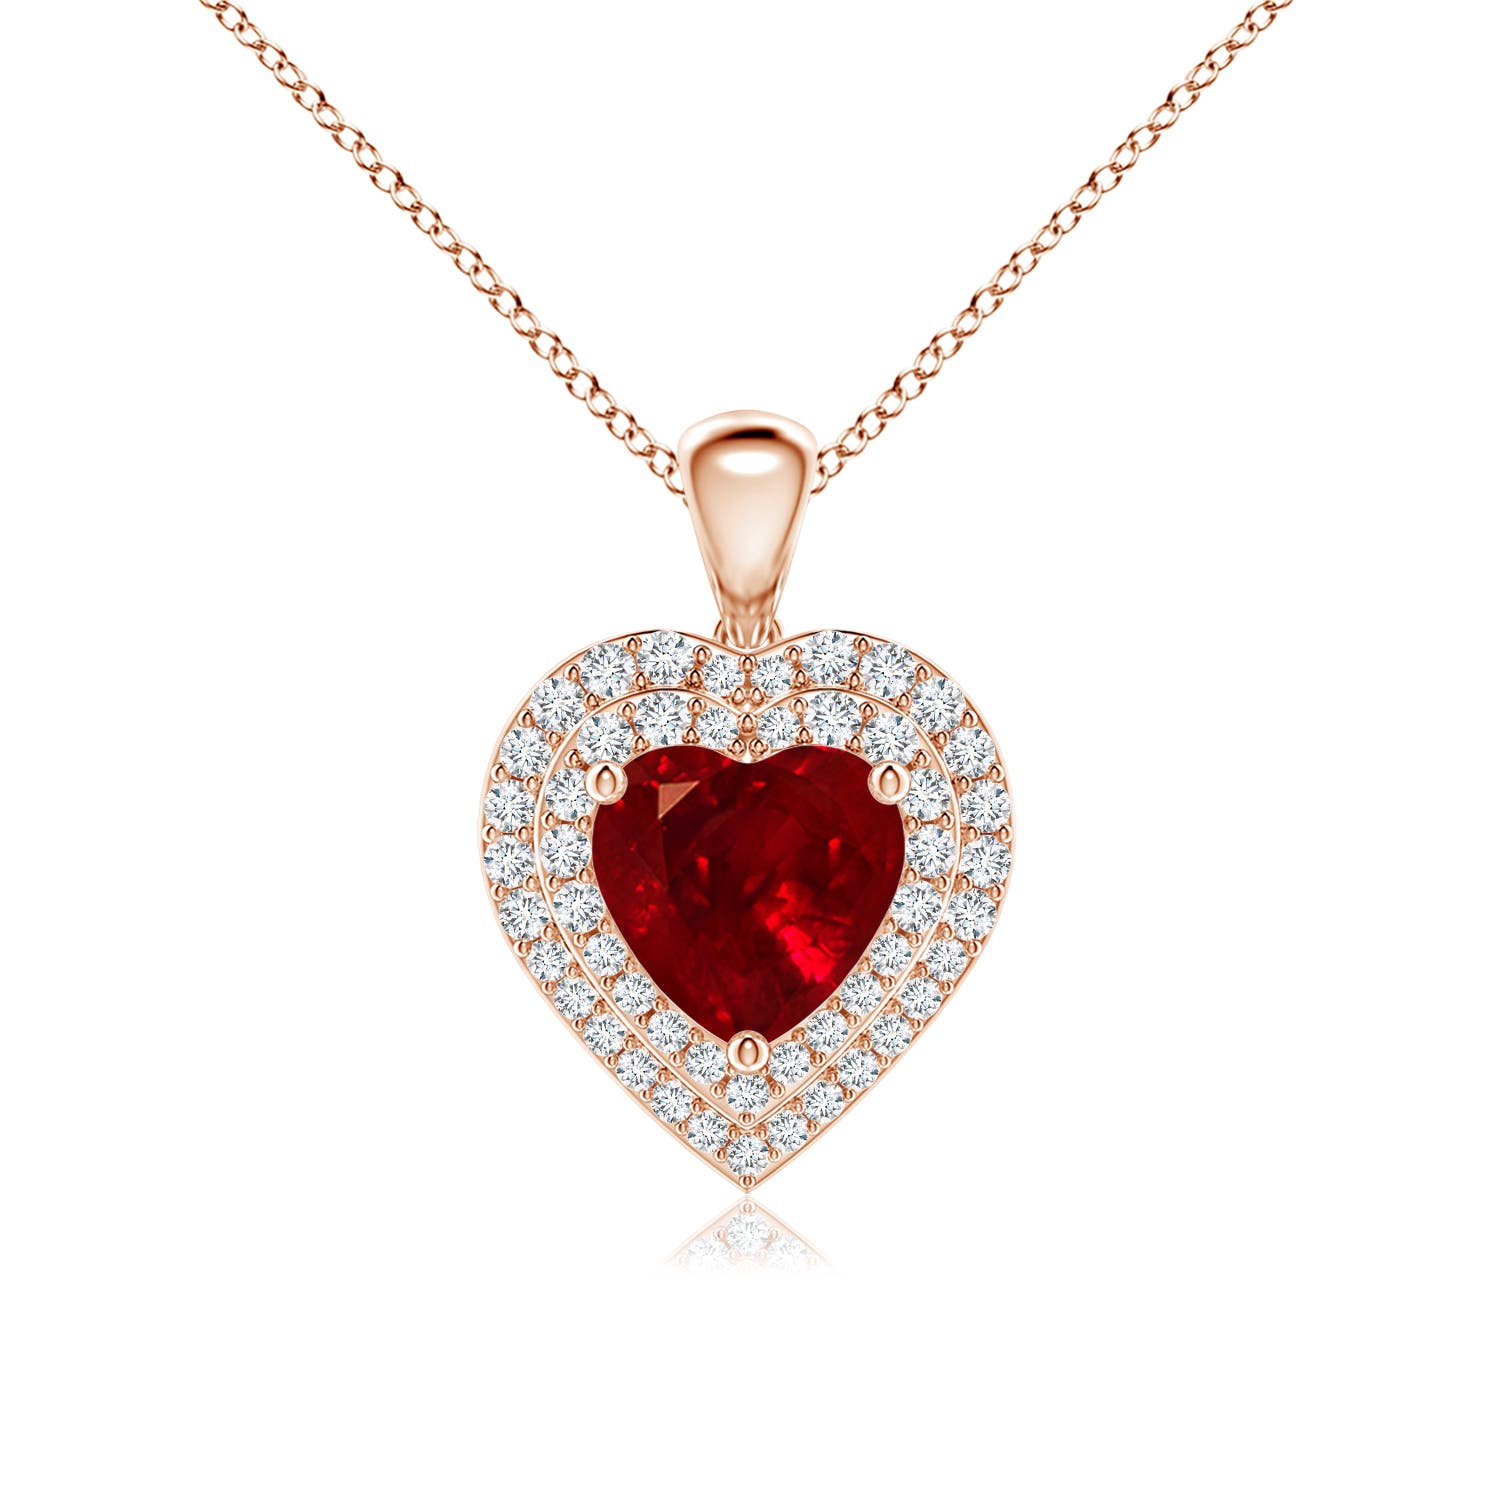 AAAA - Ruby / 2.08 CT / 14 KT Rose Gold